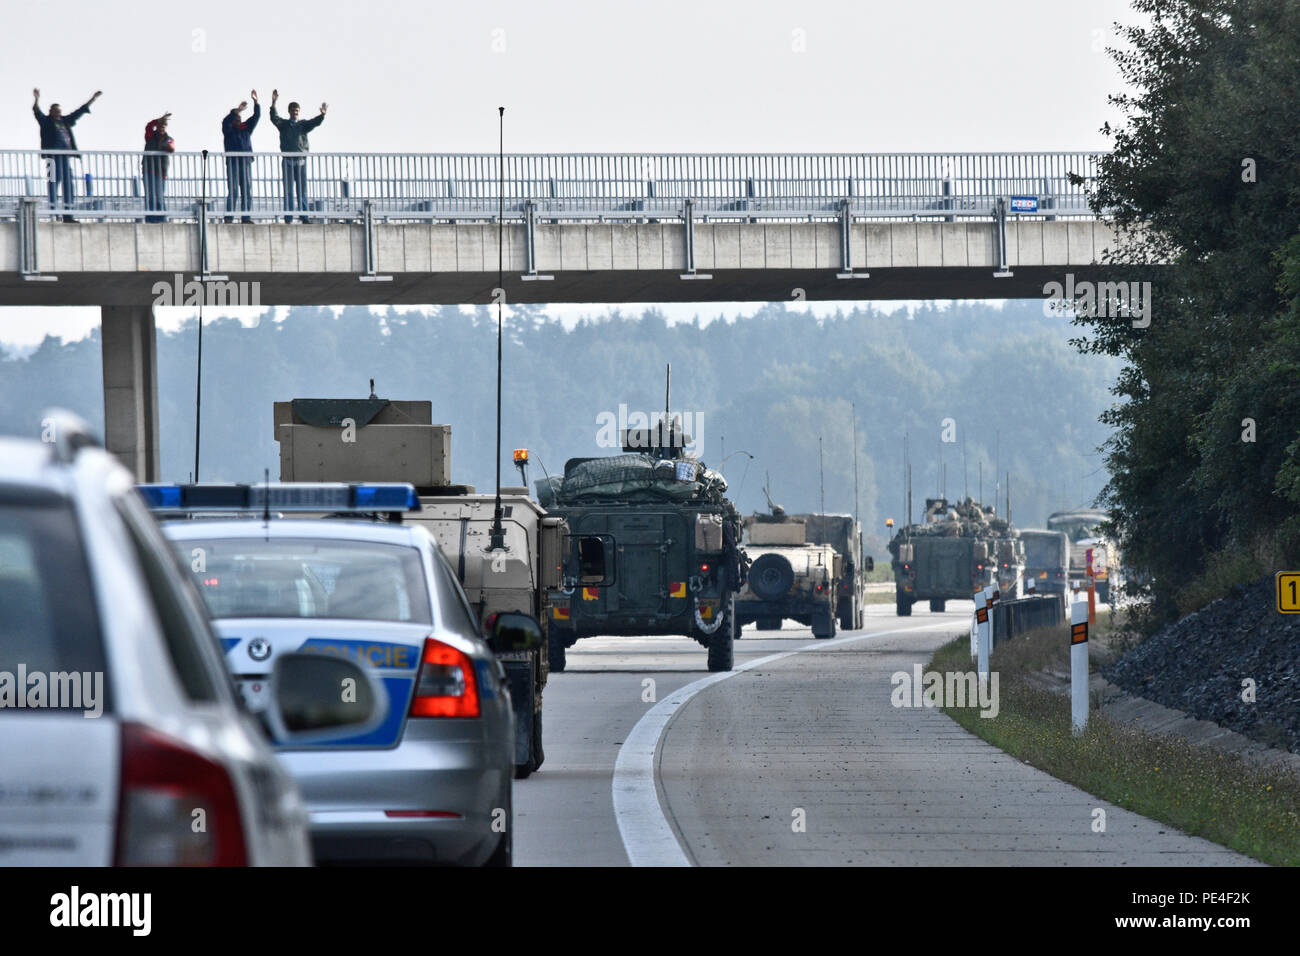 Local Czech Republic residents cheer on Troopers assigned to 4th Squadron, 2nd Cavalry Regiment, while watching them participate in Dragoon Crossing, a tactical road march starting out at Rose Barracks, Germany and continuing through the Czech Republic and the Slovak Republic ending in Hungary Sept. 13, 2015. The purpose of the exercise is to reassure NATO allies of the U.S. intent during Operation Atlantic Resolve while demonstrating interoperability and freedom of movement throughout Eastern Europe. (U.S. Army photo by Sgt. William A. Tanner/released) Stock Photo